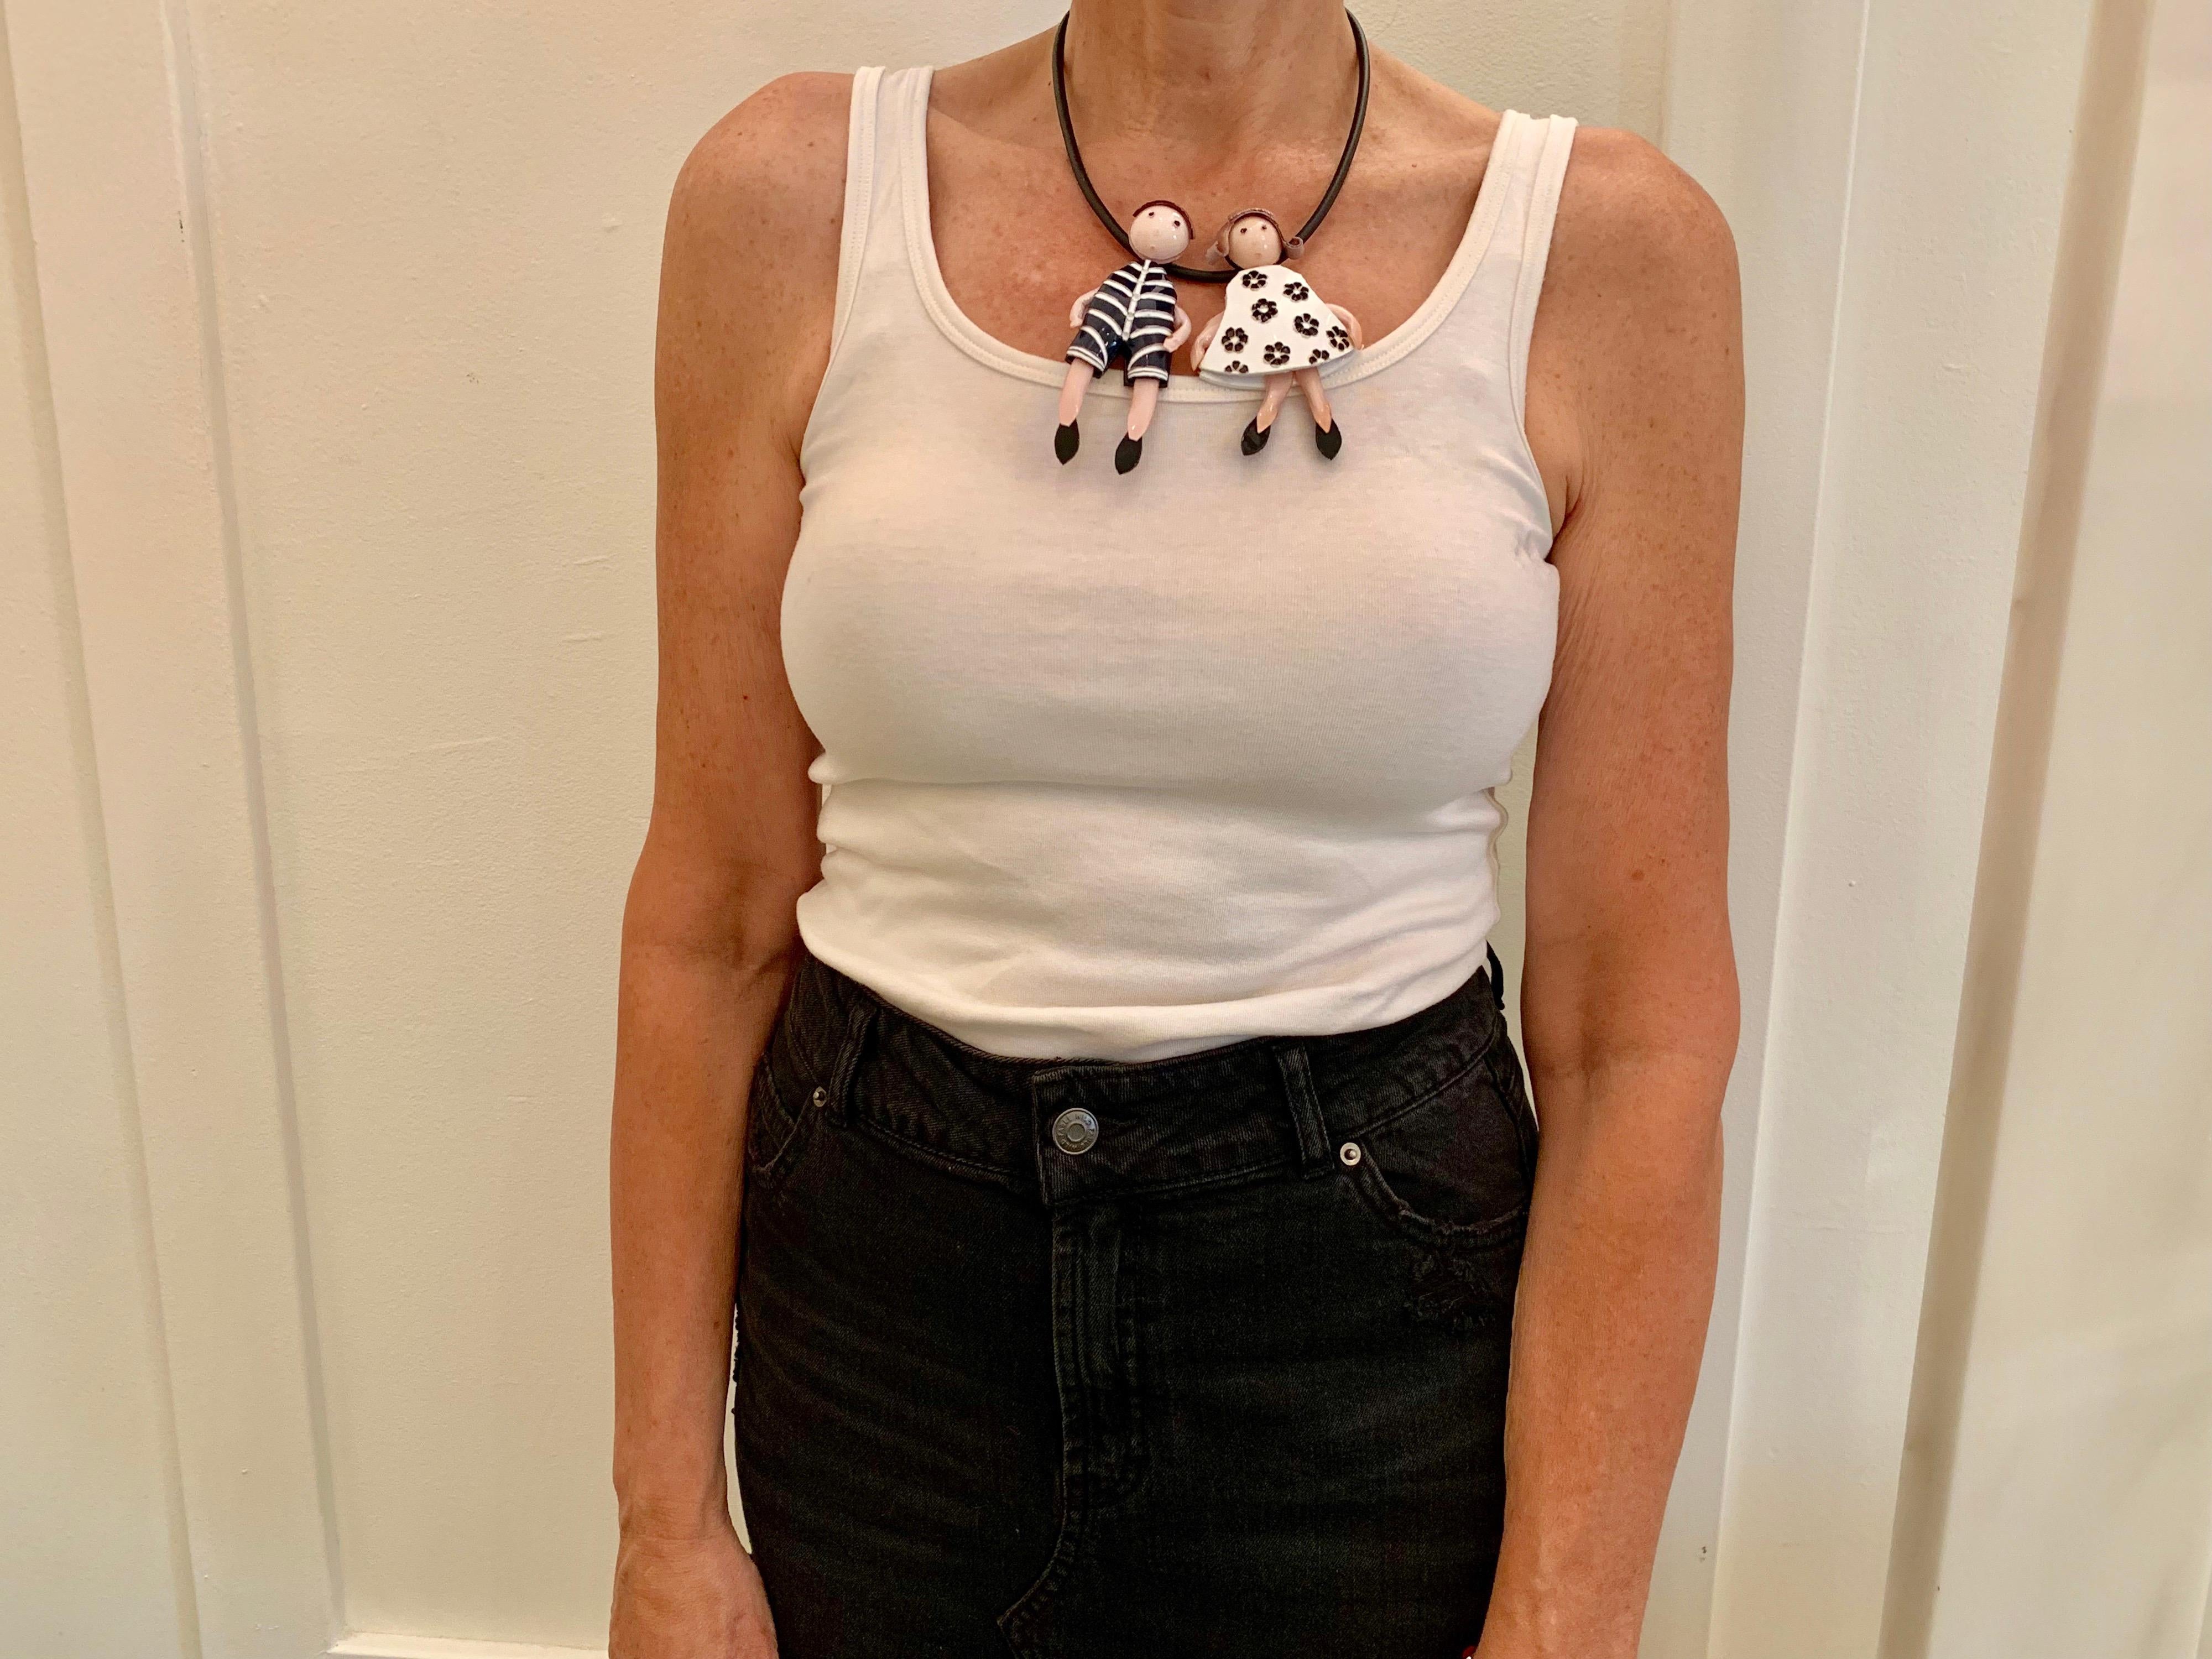 Light and easy to wear, this handmade contemporary artisanal statement pin-necklace was made in Paris by Cilea. The lightweight necklace features two chic Parisian children figures. Both the boy and girls three-dimensional oversized body features